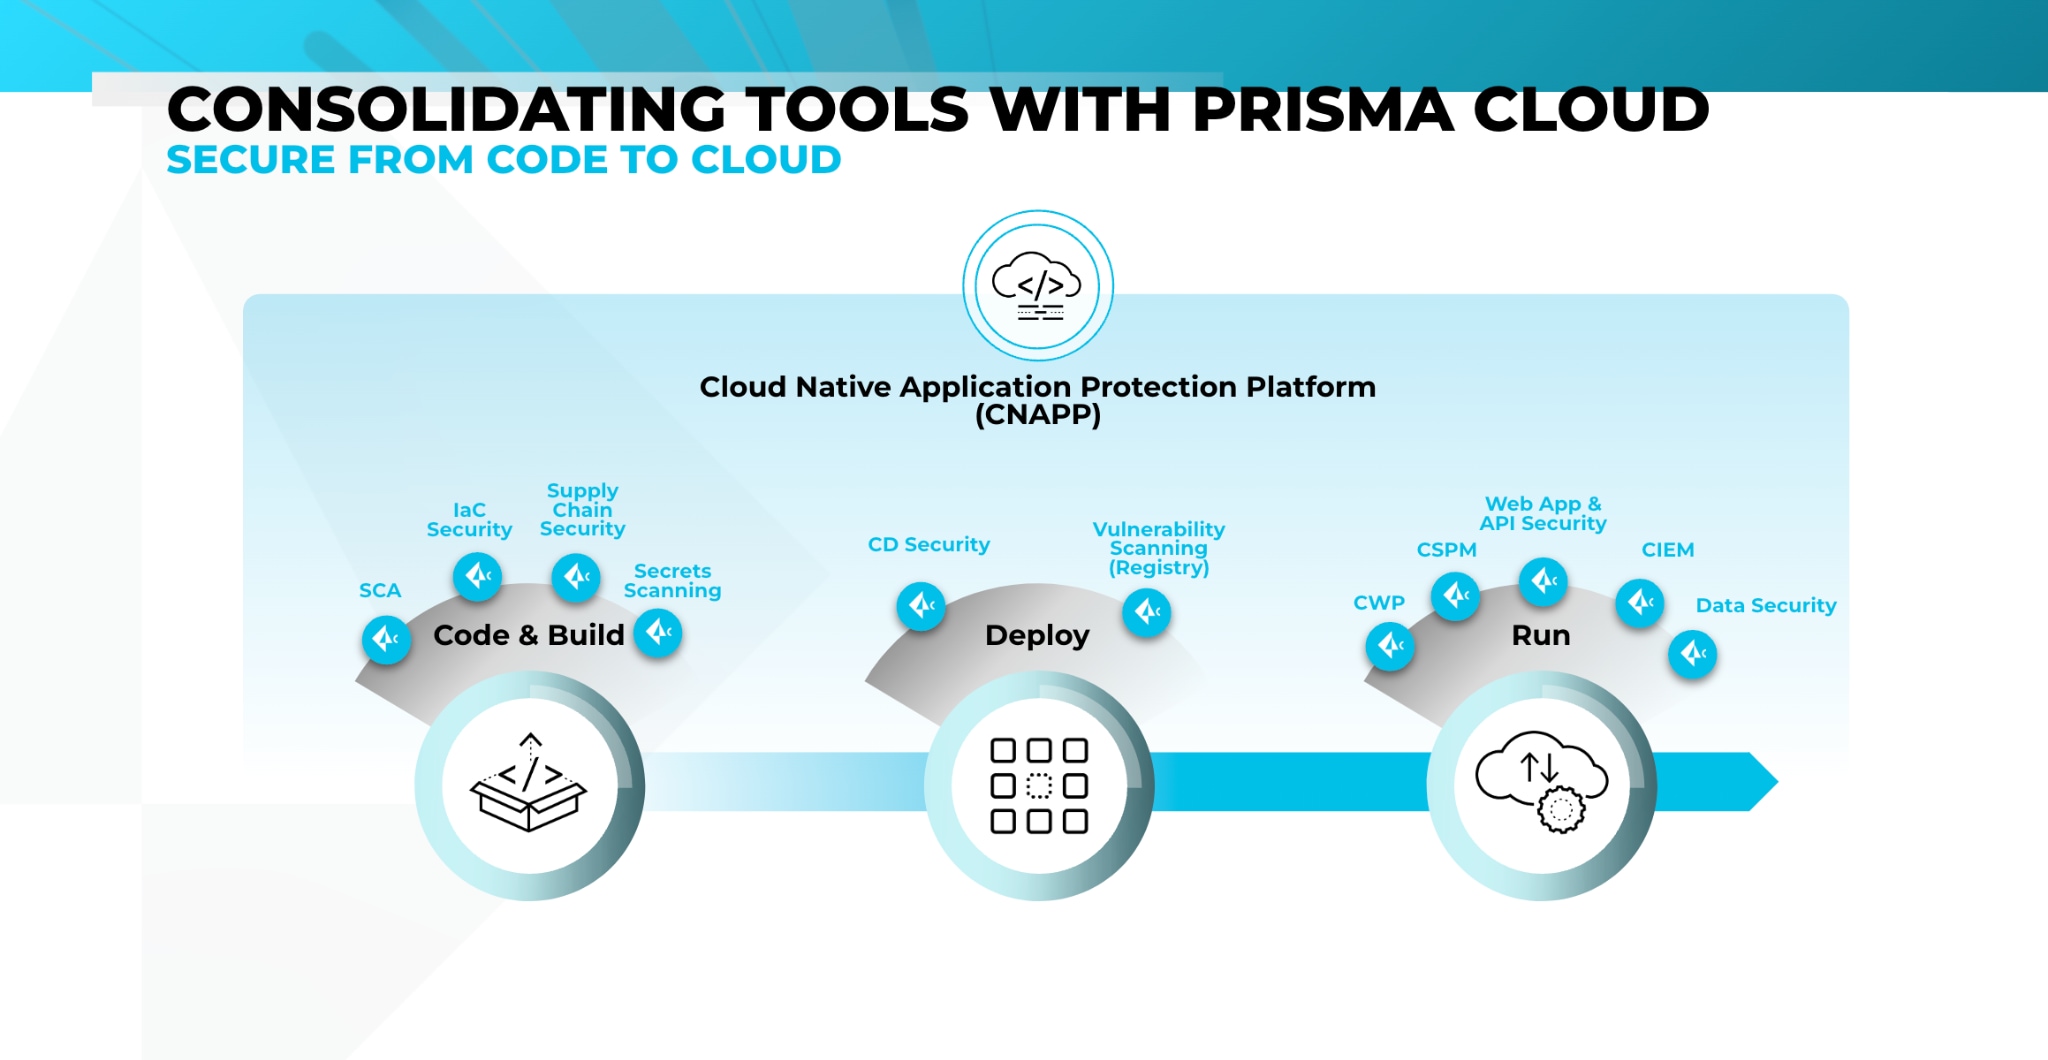 Prisma Cloud capabilities secures from code to cloud